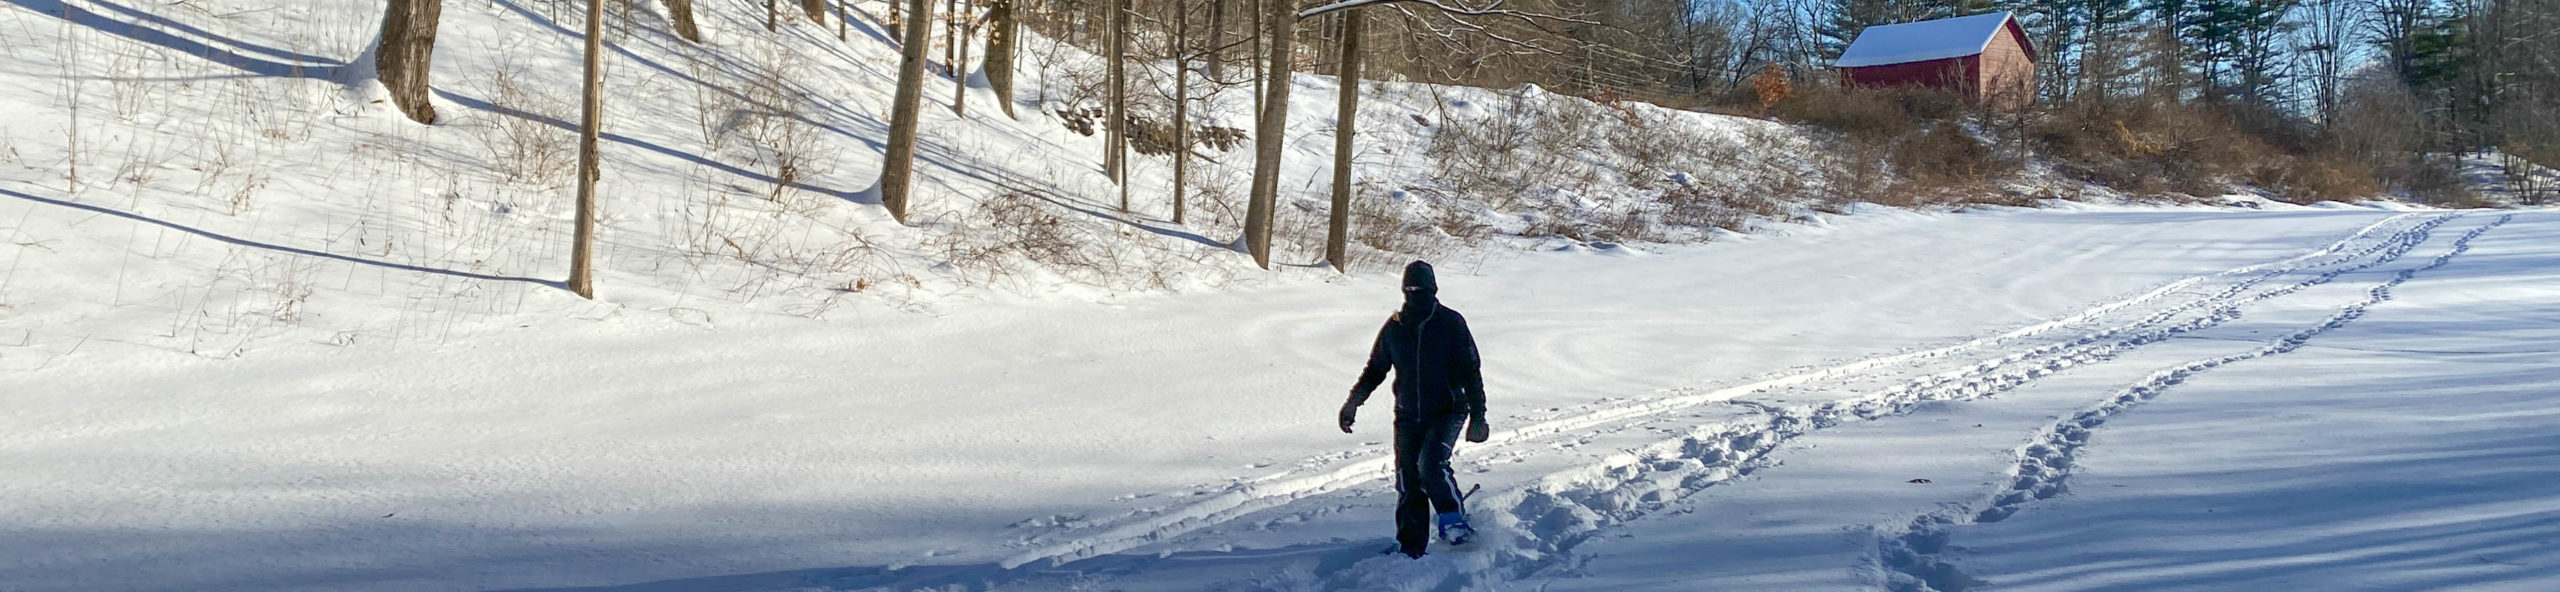 Snow Shoeing in River Park